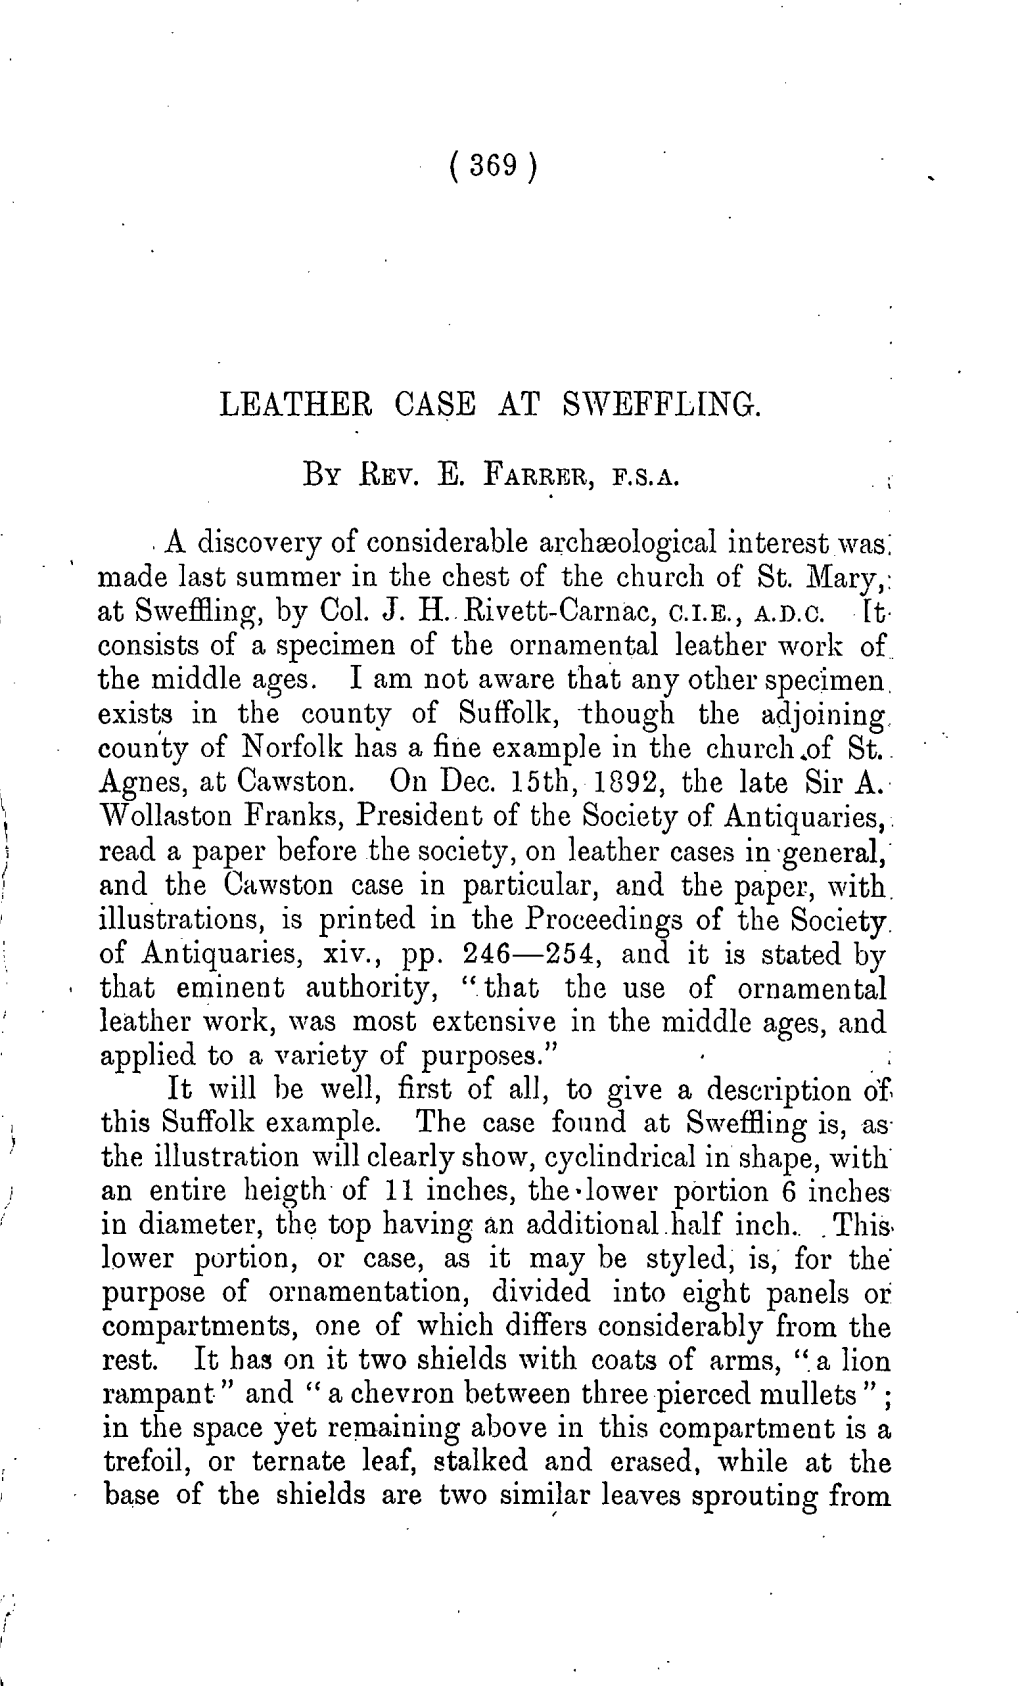 ( 369 ) LEATHER CASE at SWEFFLING. by REV. E. FARRER,FSA .A Discovery of Considerable Archmological Interest